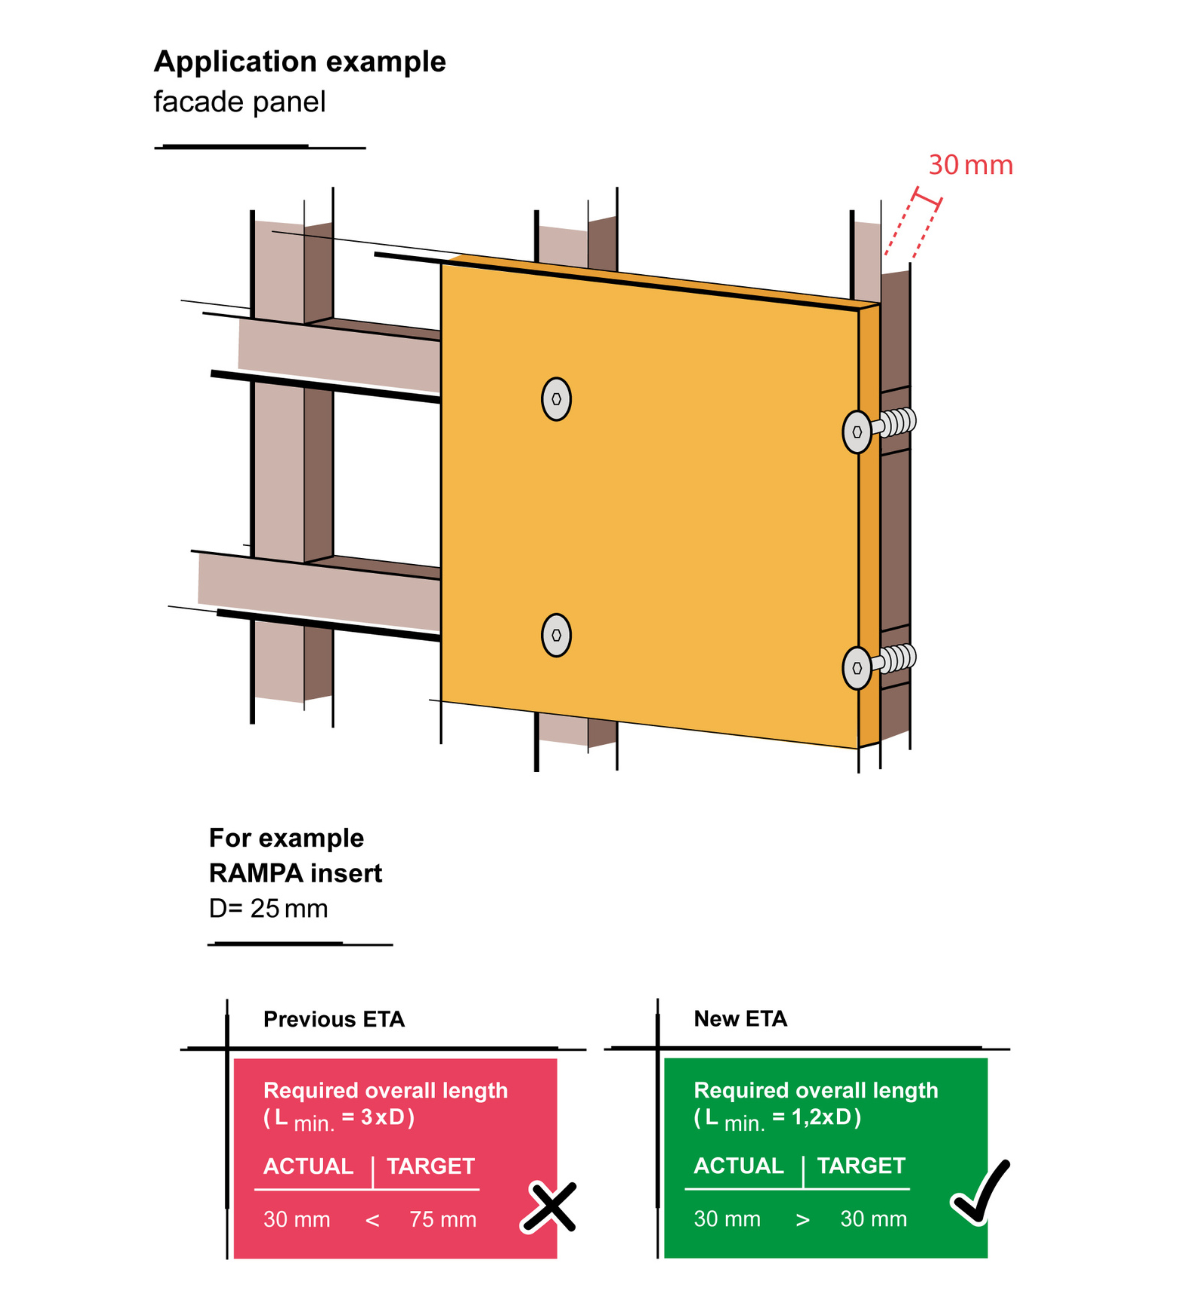 A 3D drawing of the application example of ETA-approved RAMPA inserts in the facade panel.